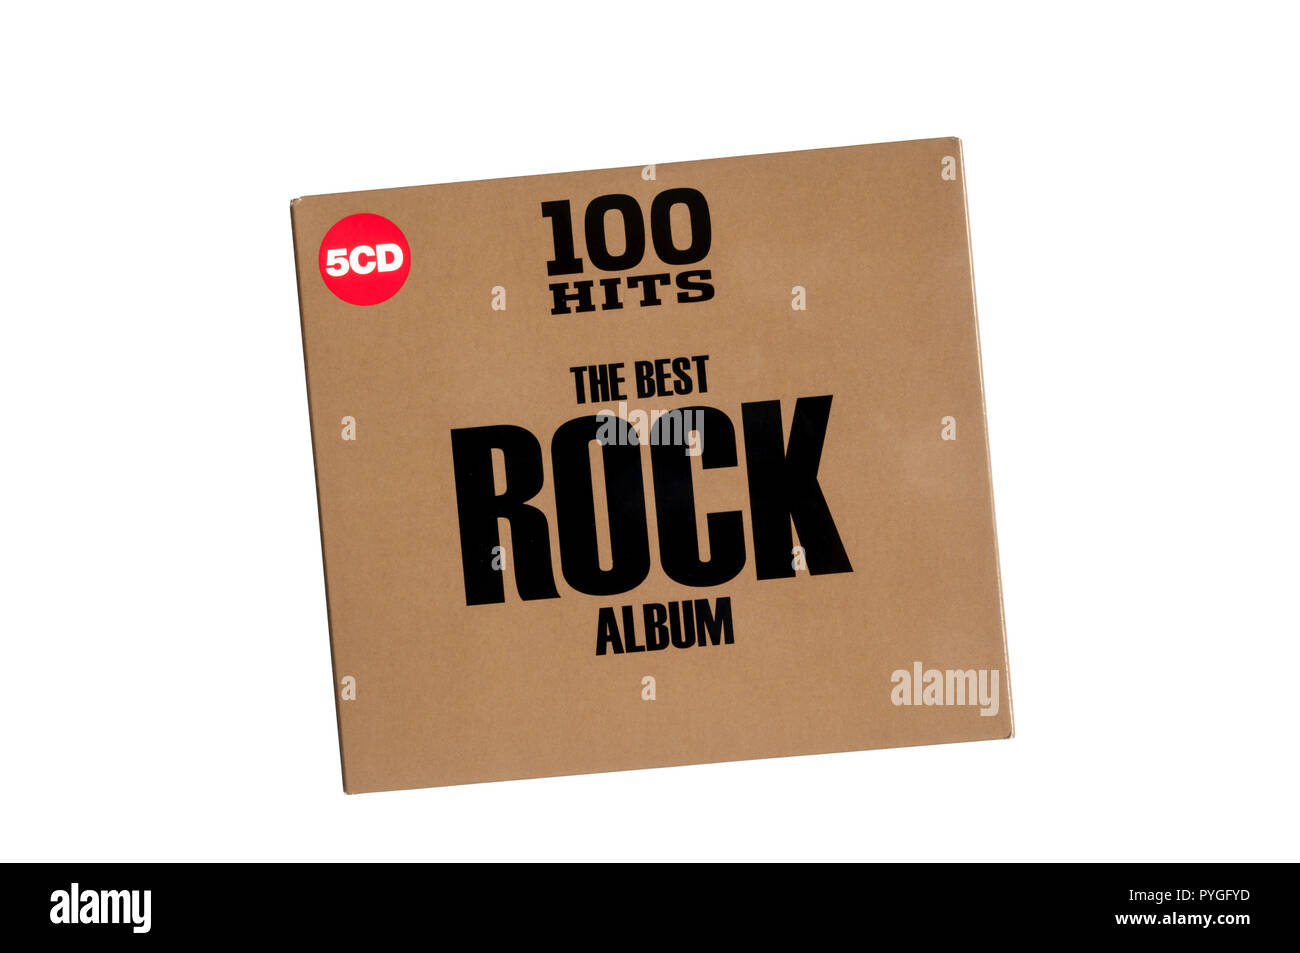 100 Hits The Best Rock Album is a 5 CD compilation collection or box set released in 2018. Stock Photo